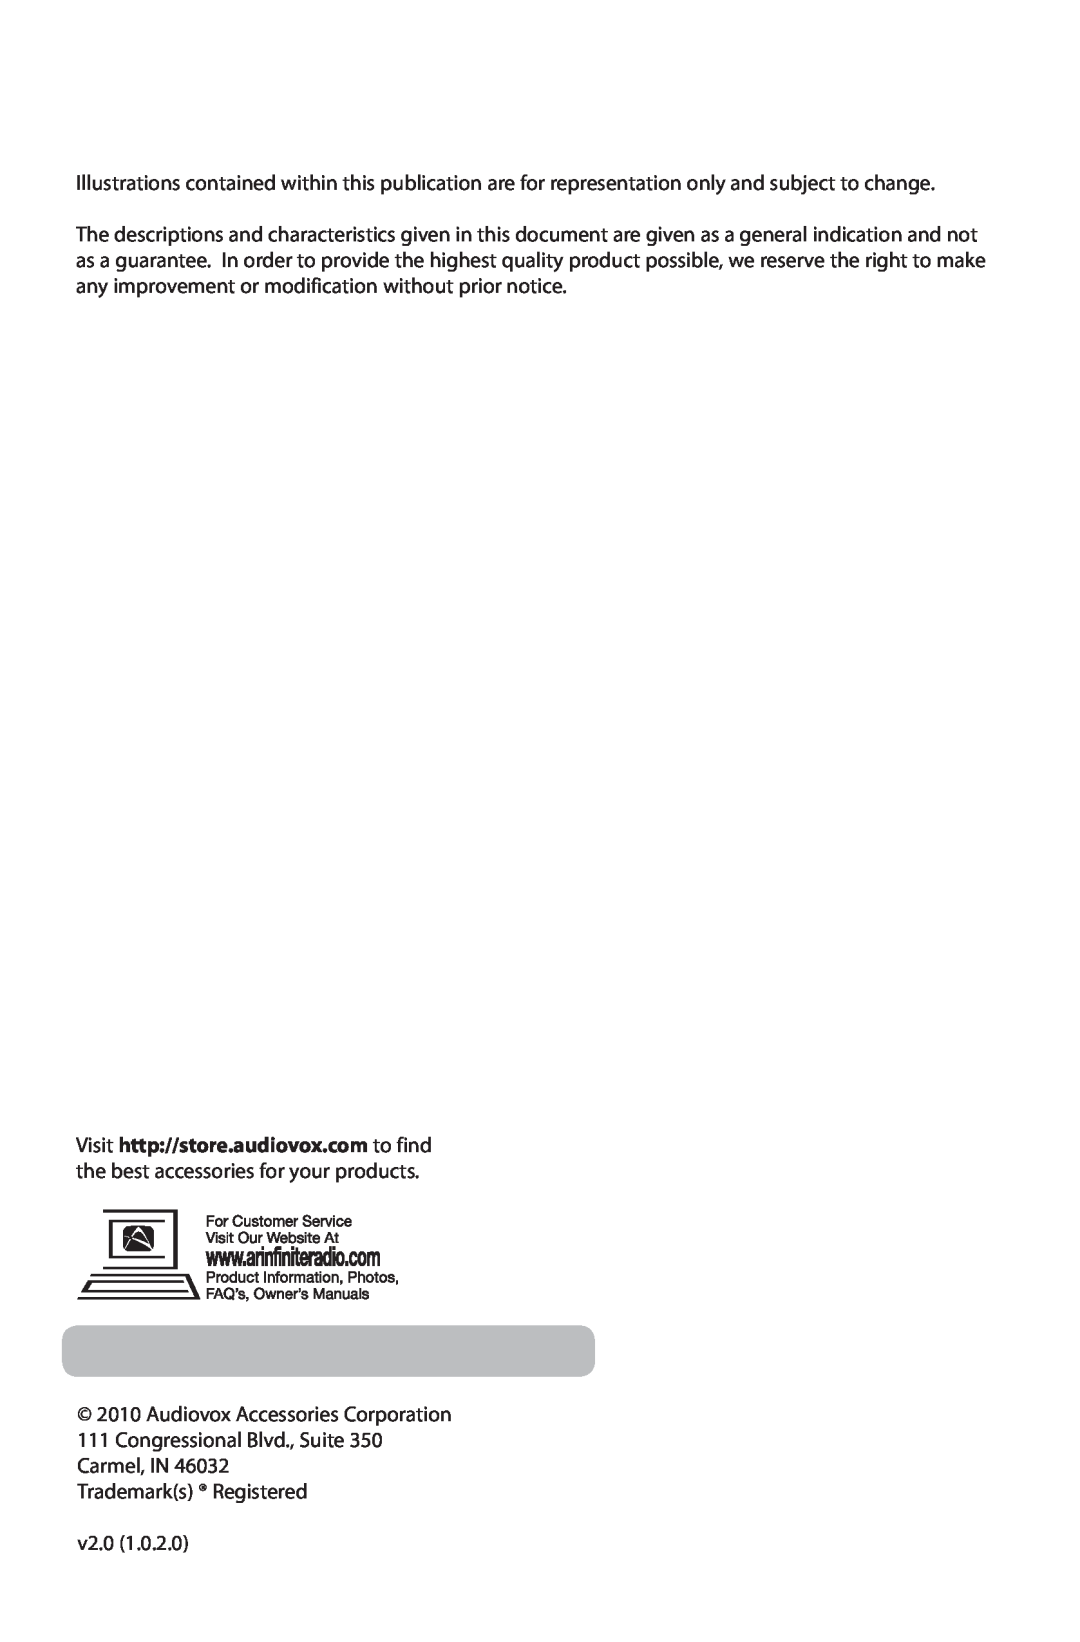 Acoustic Research ARIR201 user manual Audiovox Accessories Corporation 